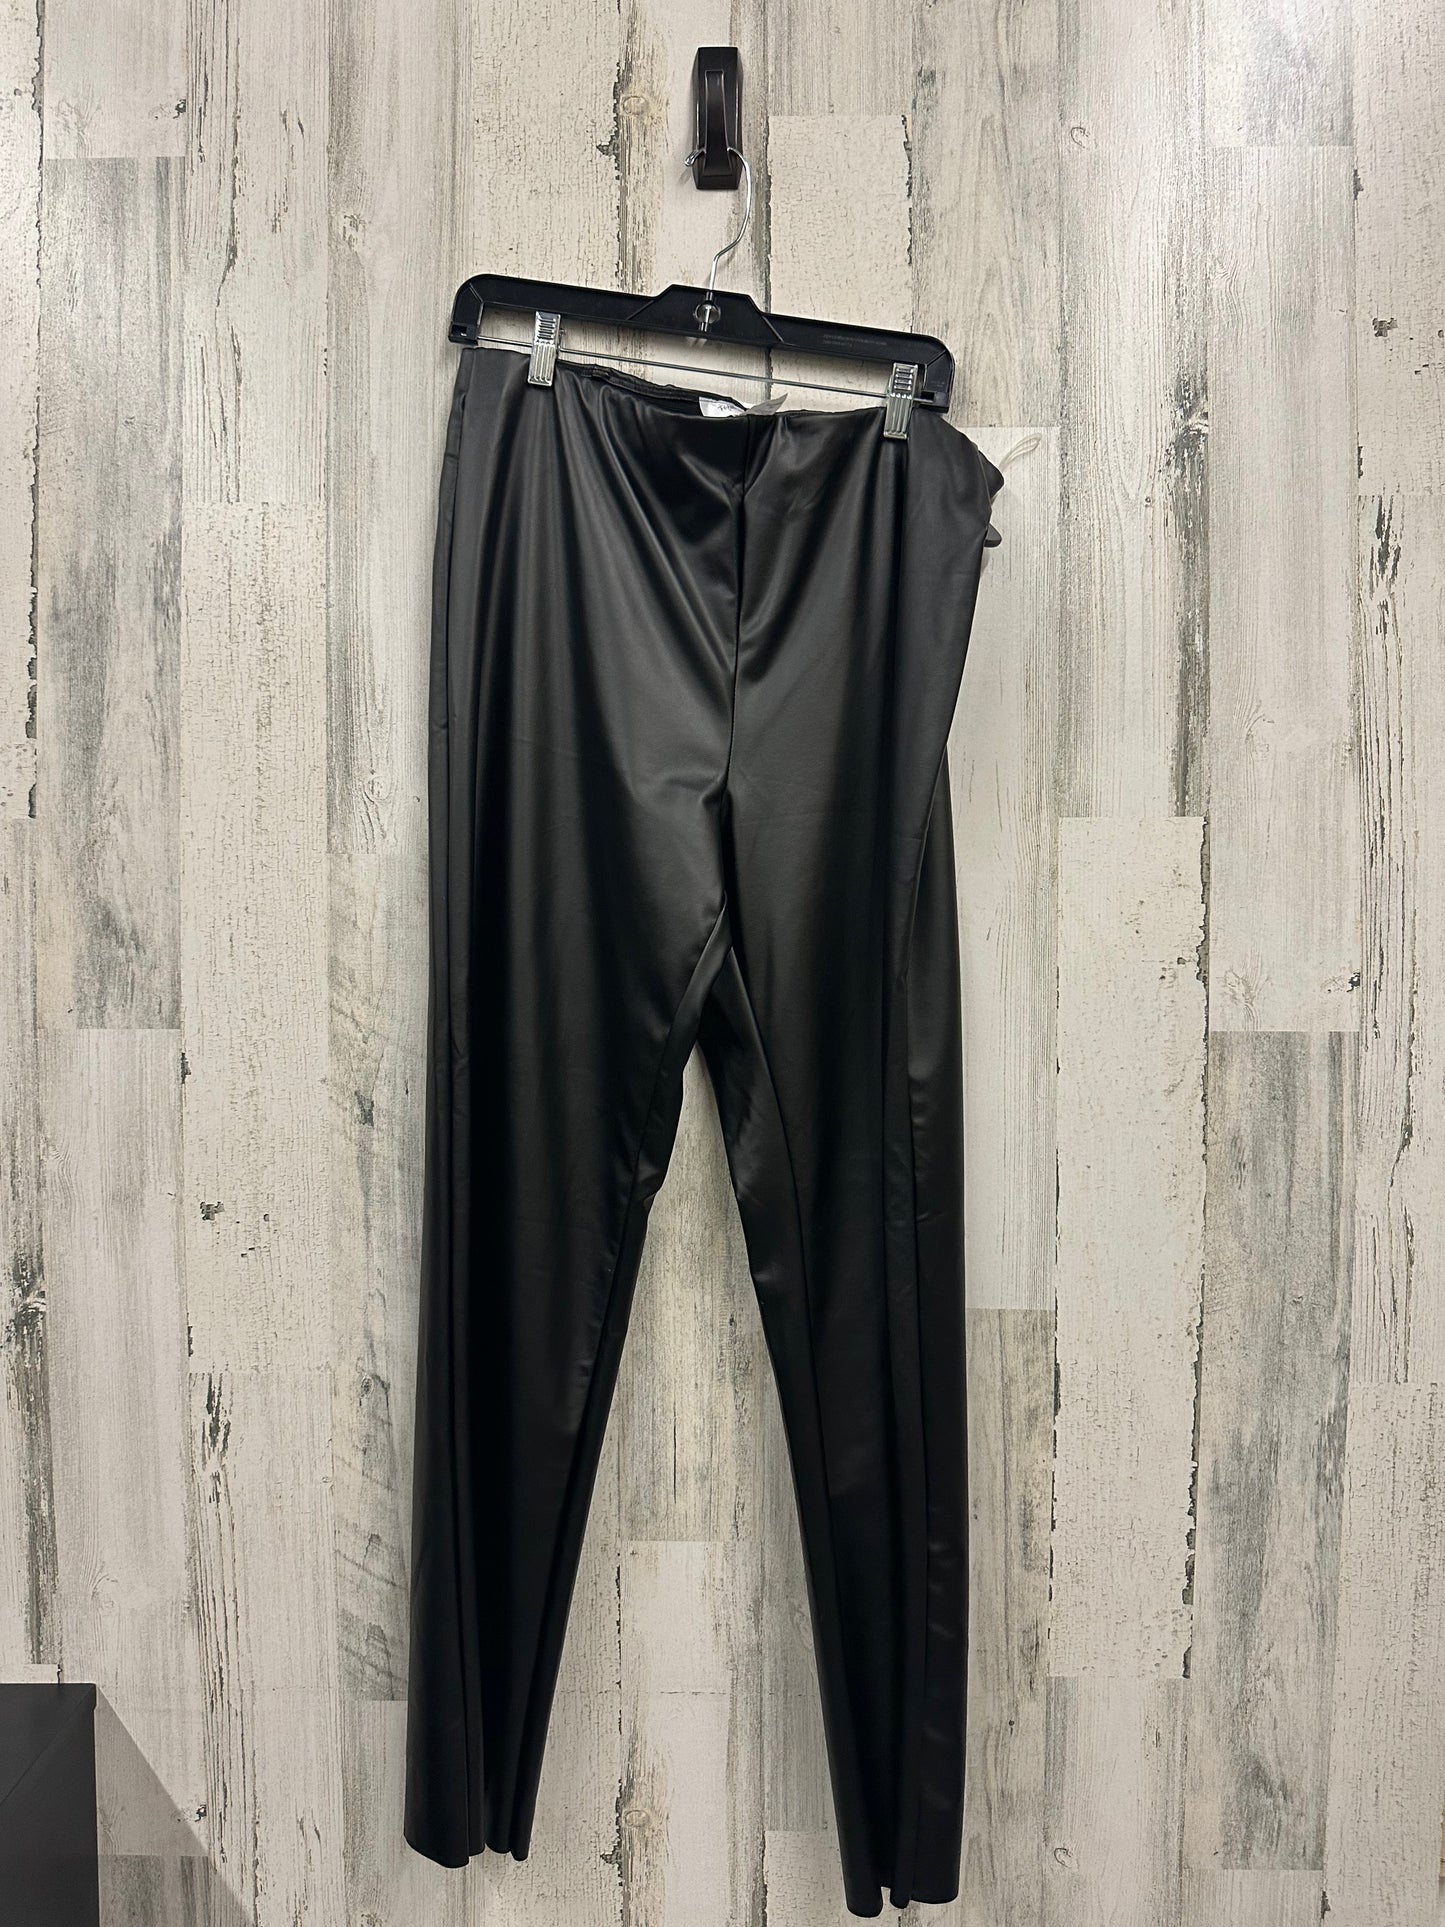 Pants Other By Clothes Mentor  Size: 2x